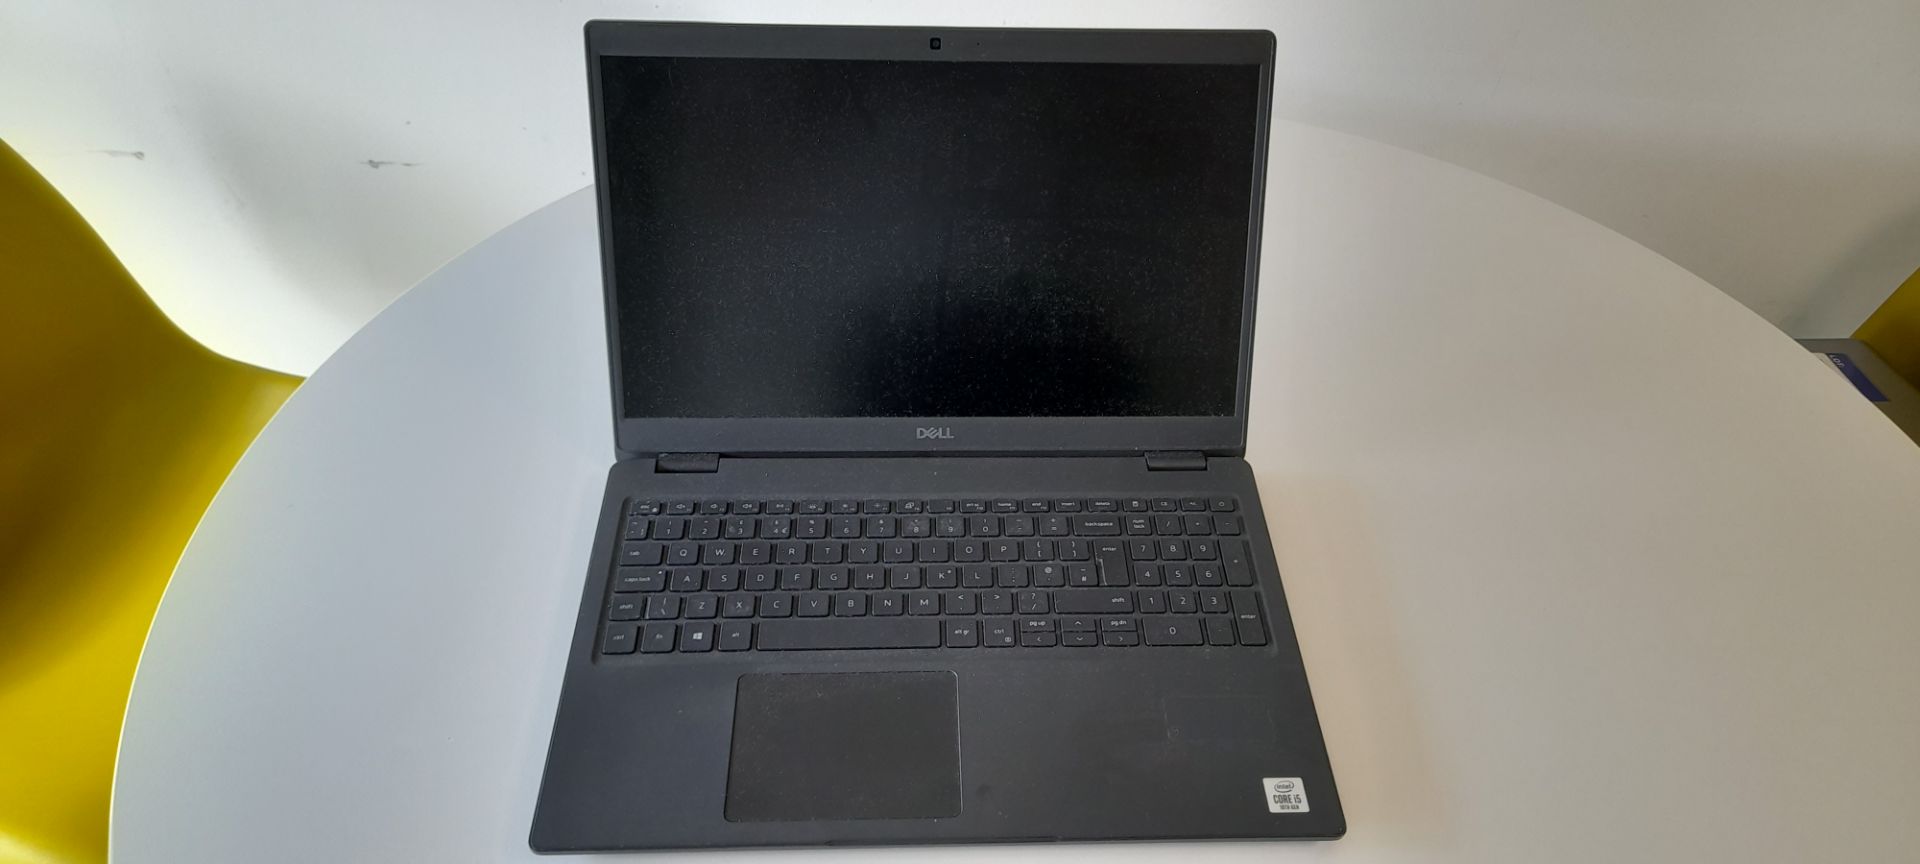 Dell Latitude 3510, intel Core i5, 10th generation. Collection from Canary Wharf, London, E14 - Image 2 of 7